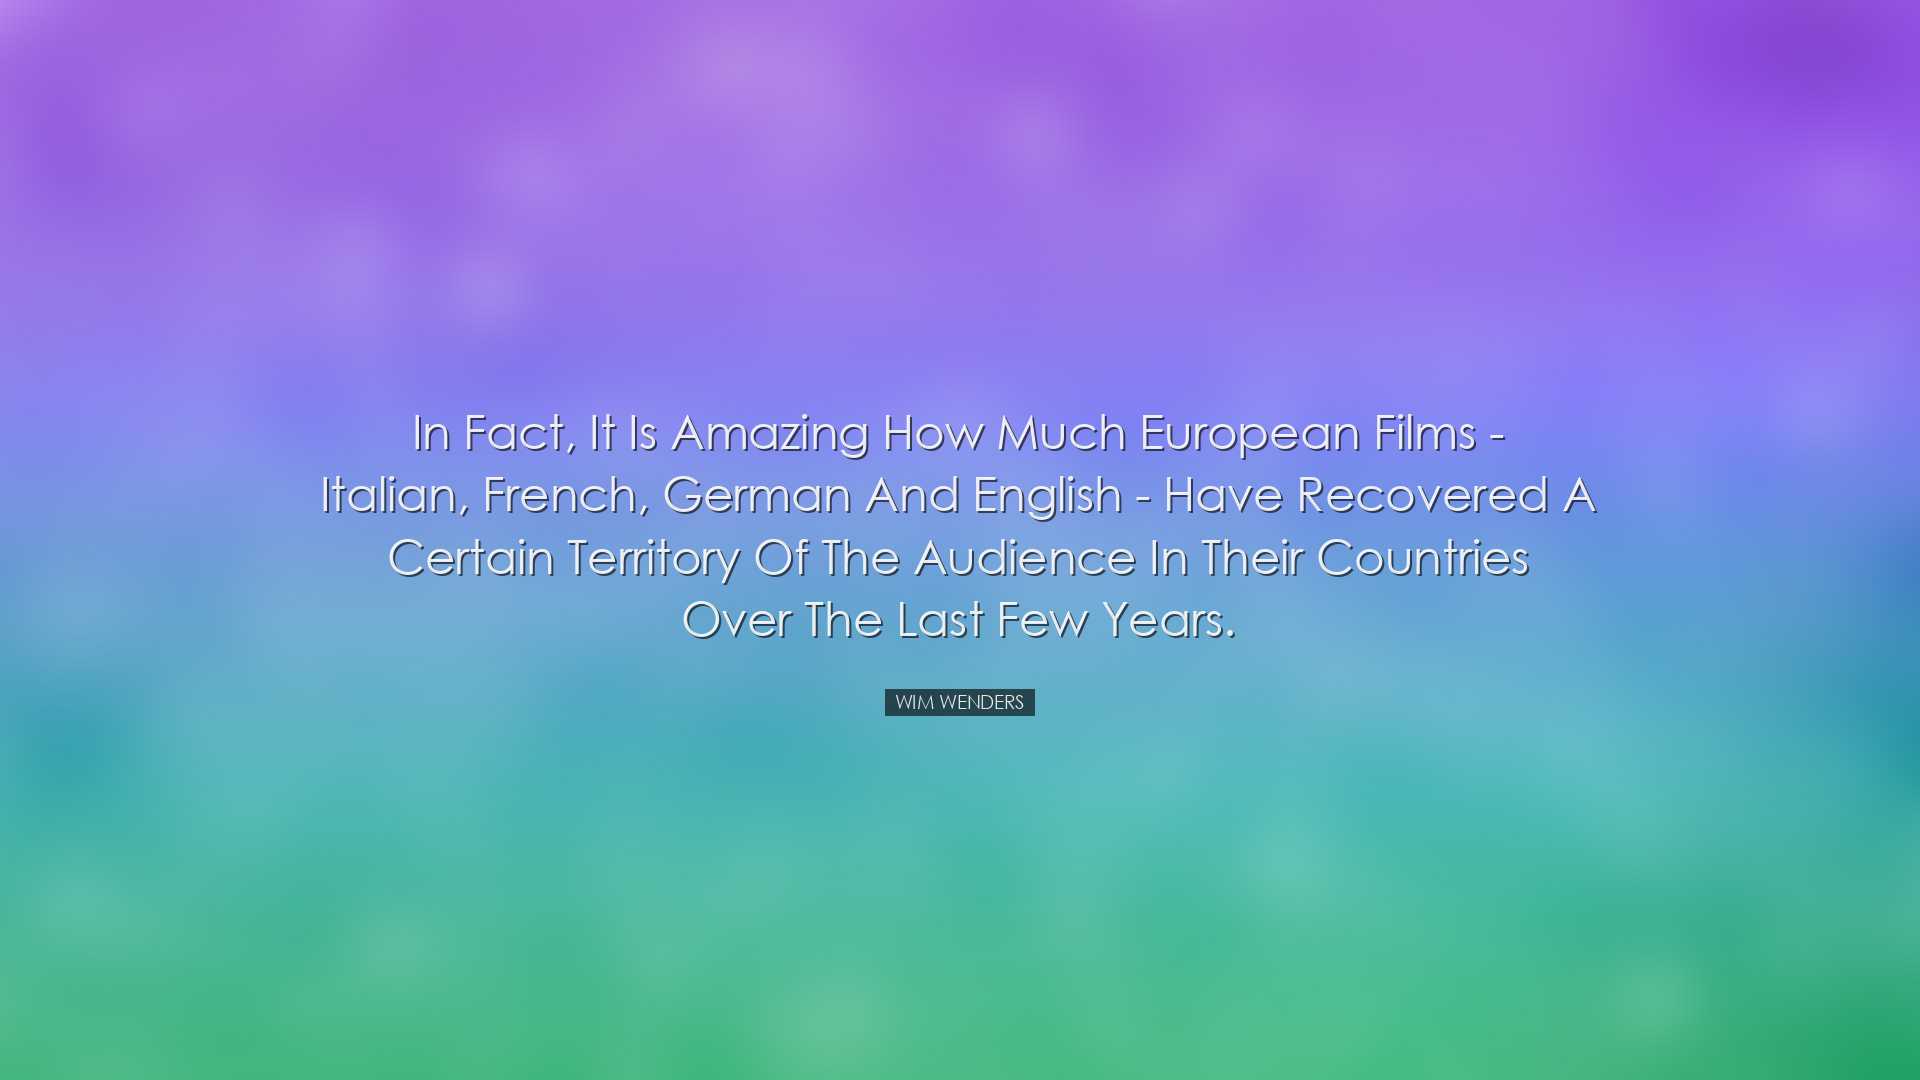 In fact, it is amazing how much European films - Italian, French,